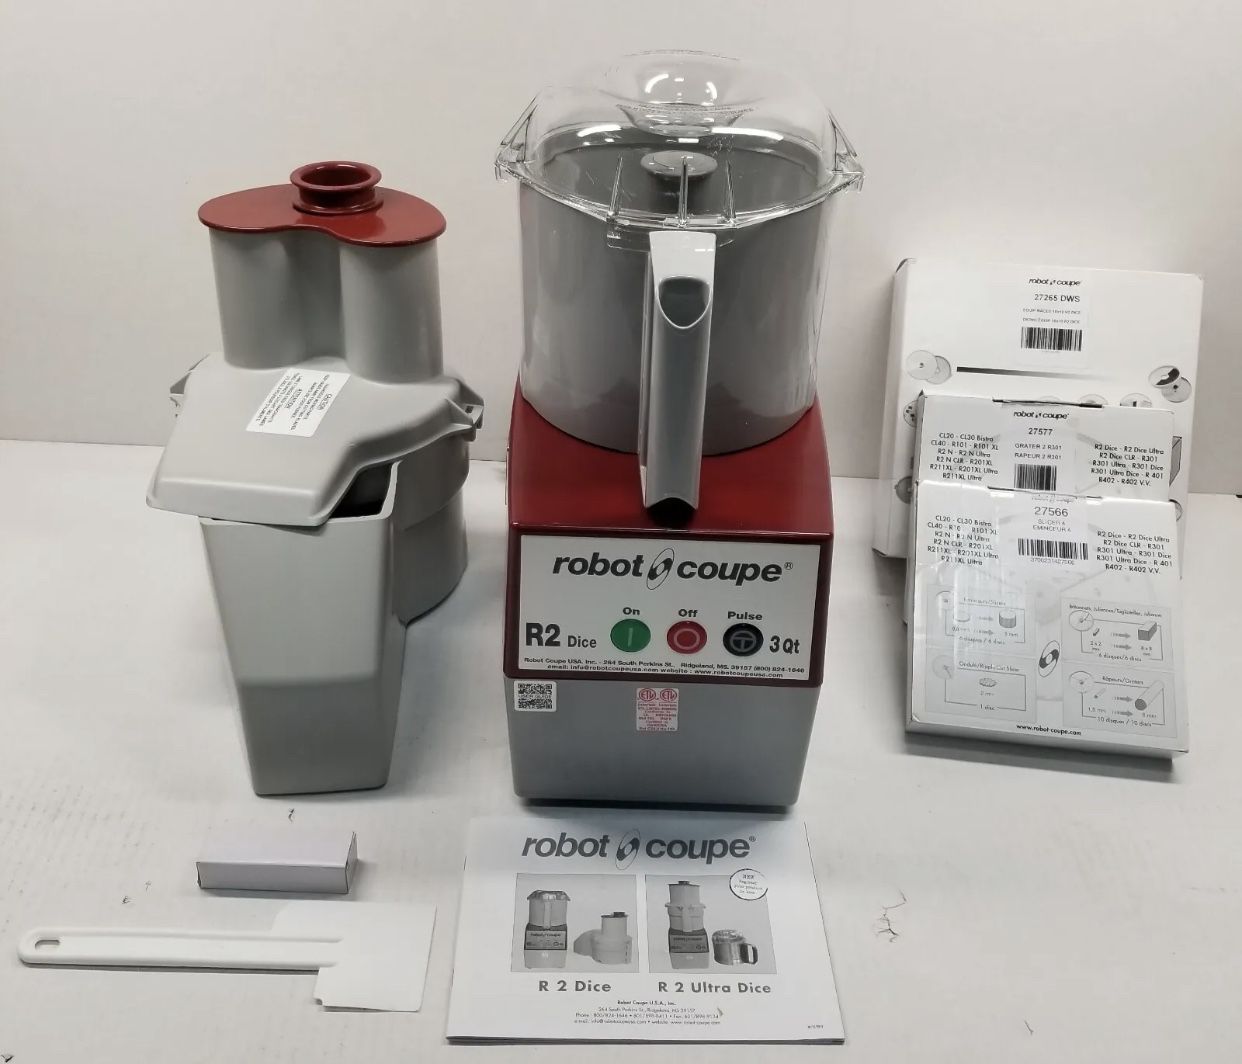 til bundet Gud Banzai Robot Coupe R2 Dice Continuous Feed Combination Food Processor 3 Quart Bowl  for Sale in Los Angeles, CA - OfferUp